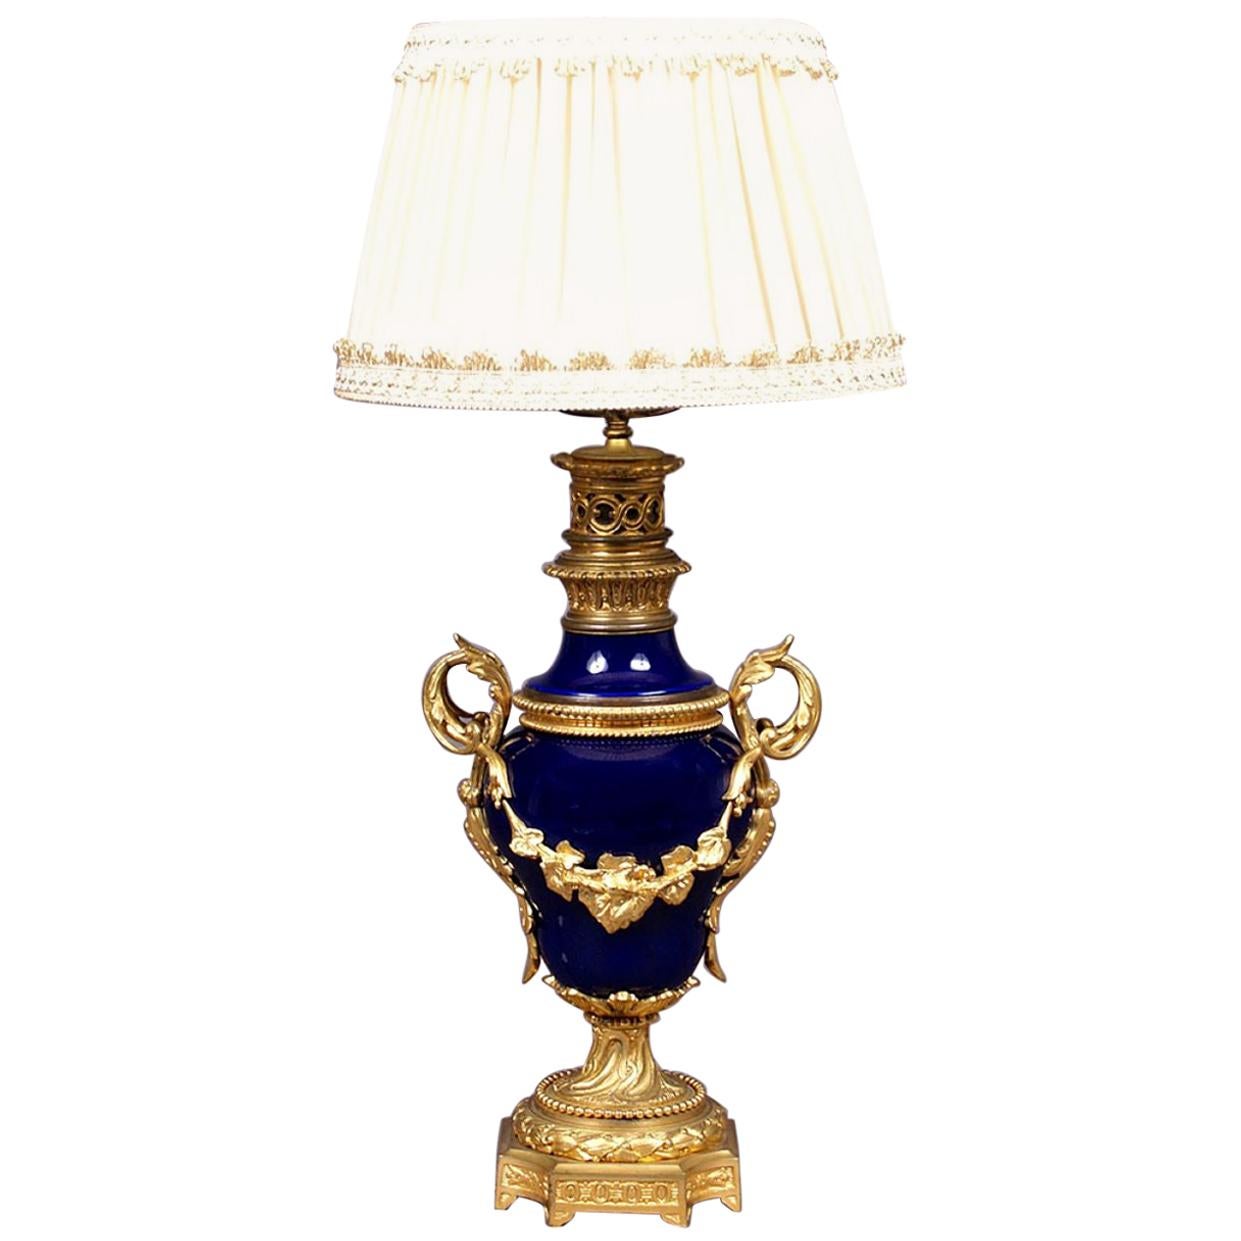 1900 cobalt porcelain and gilded bronze table lamp
Table lamp, square base with chamfered corners, engraved with leaf patterns, with eight legs. Above, a wider, porcelain belly, narrowed upwards, with gilded bronze decorations in the form of plant